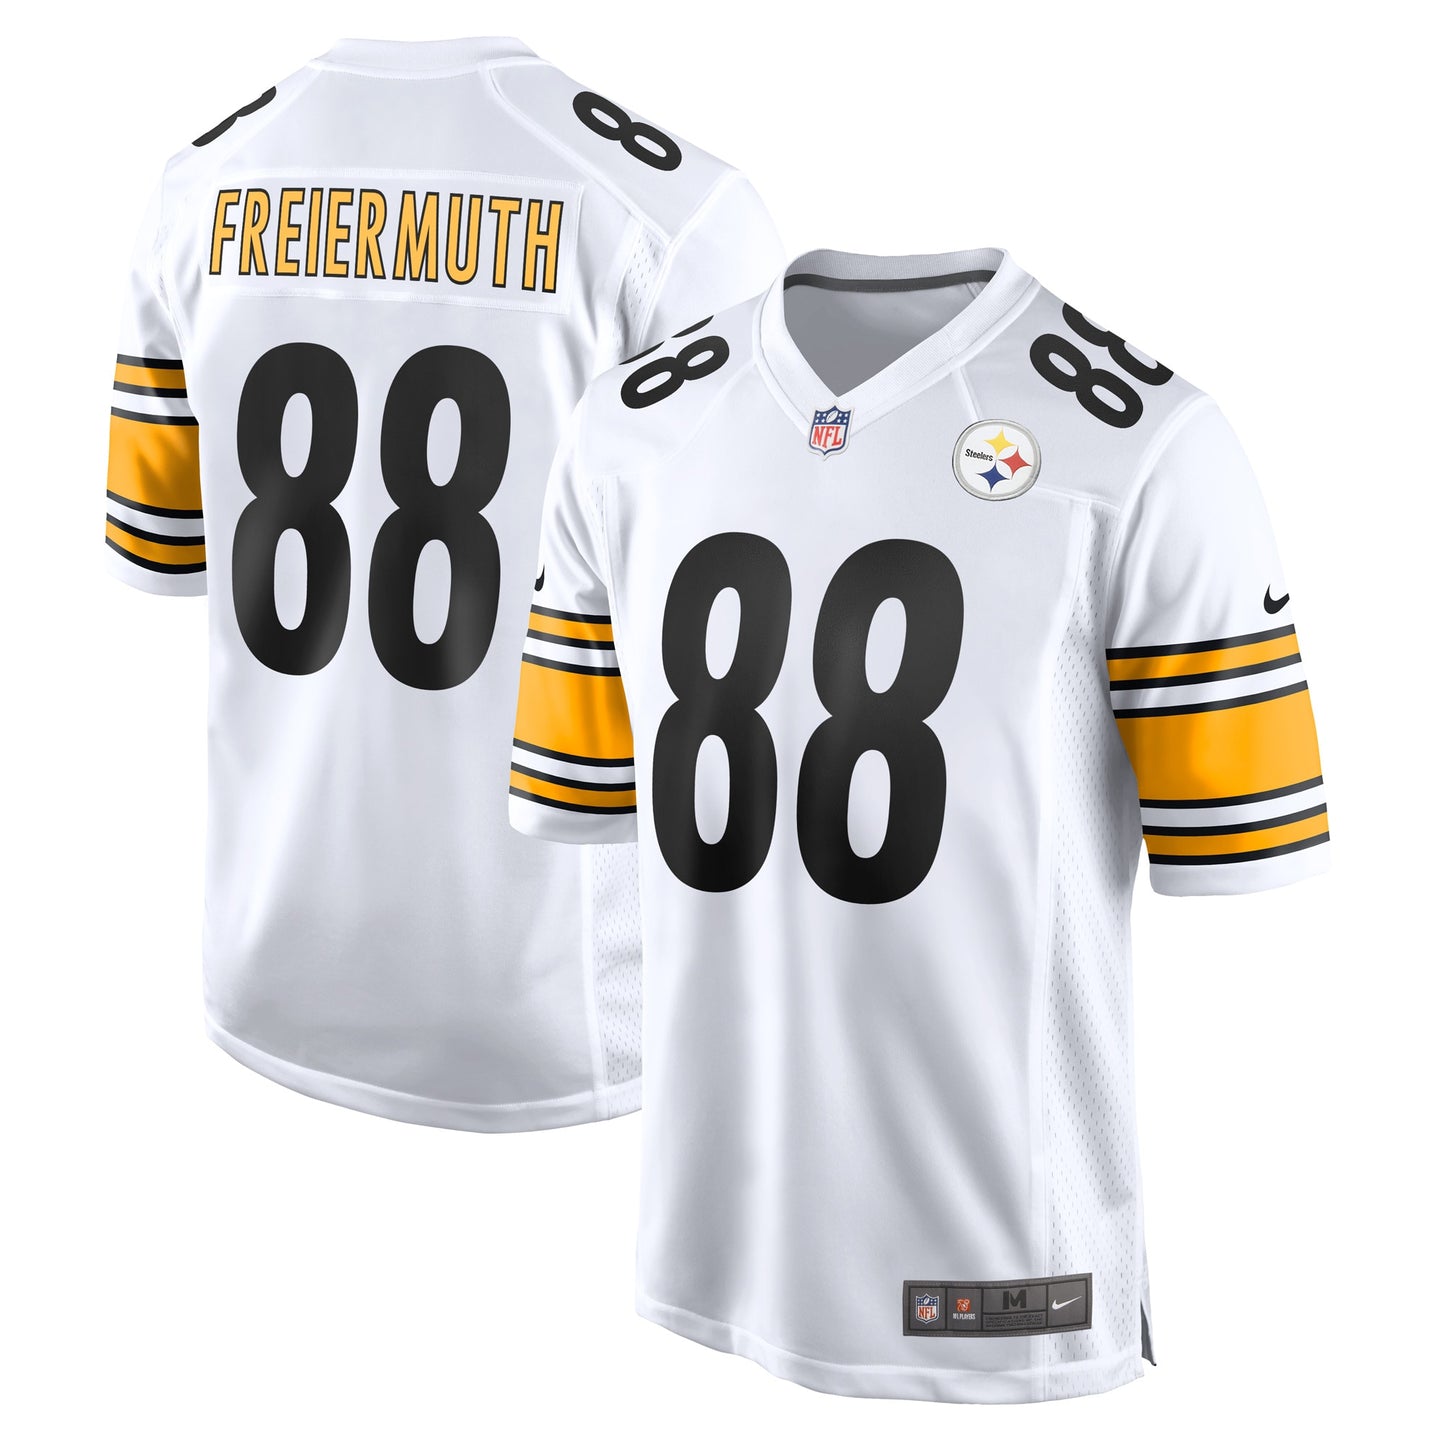 Pat Freiermuth Pittsburgh Steelers Nike Game Player Jersey - White